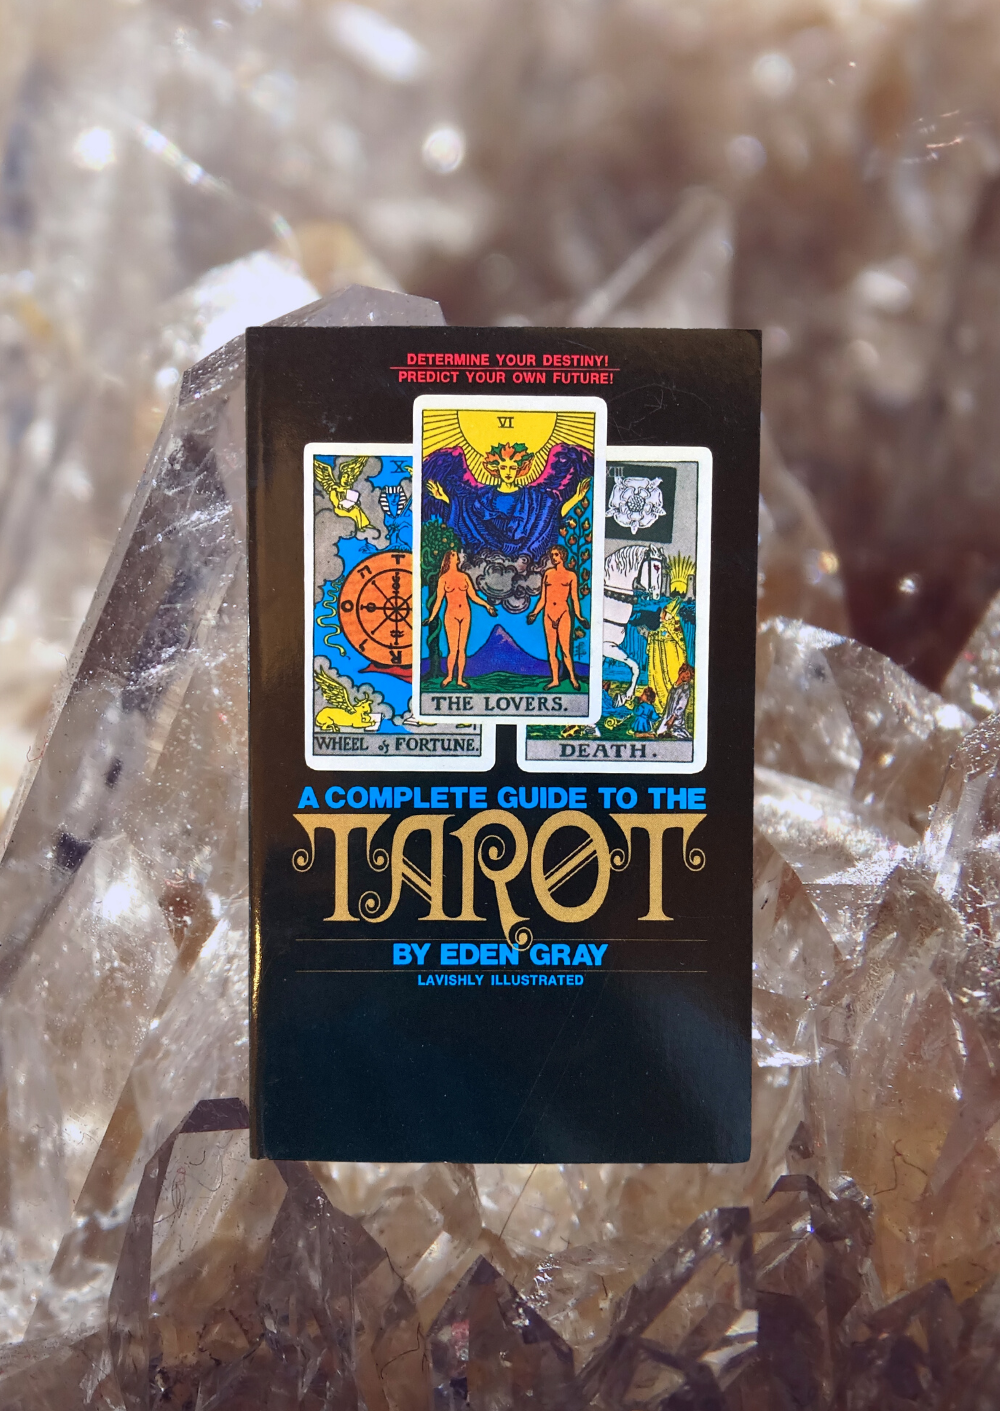 A Complete Guide to the Tarot - Eden Gray